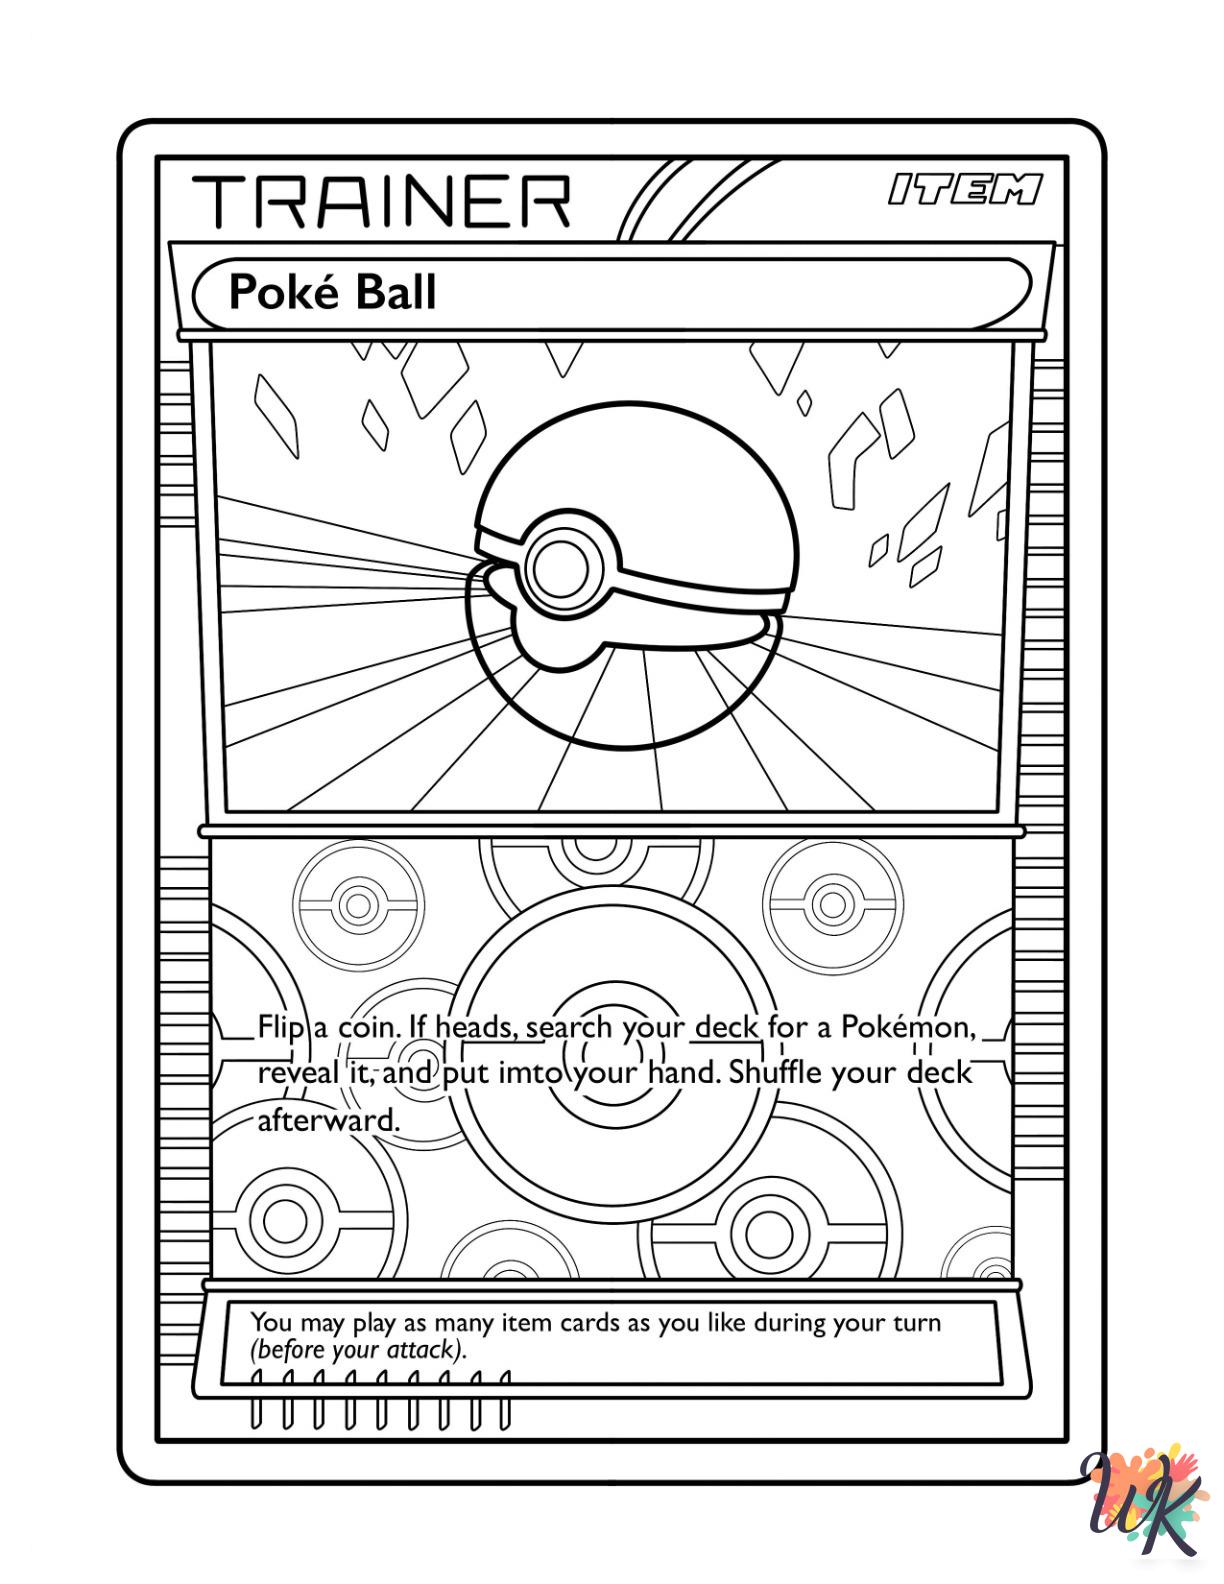 Pokeball coloring pages for adults easy